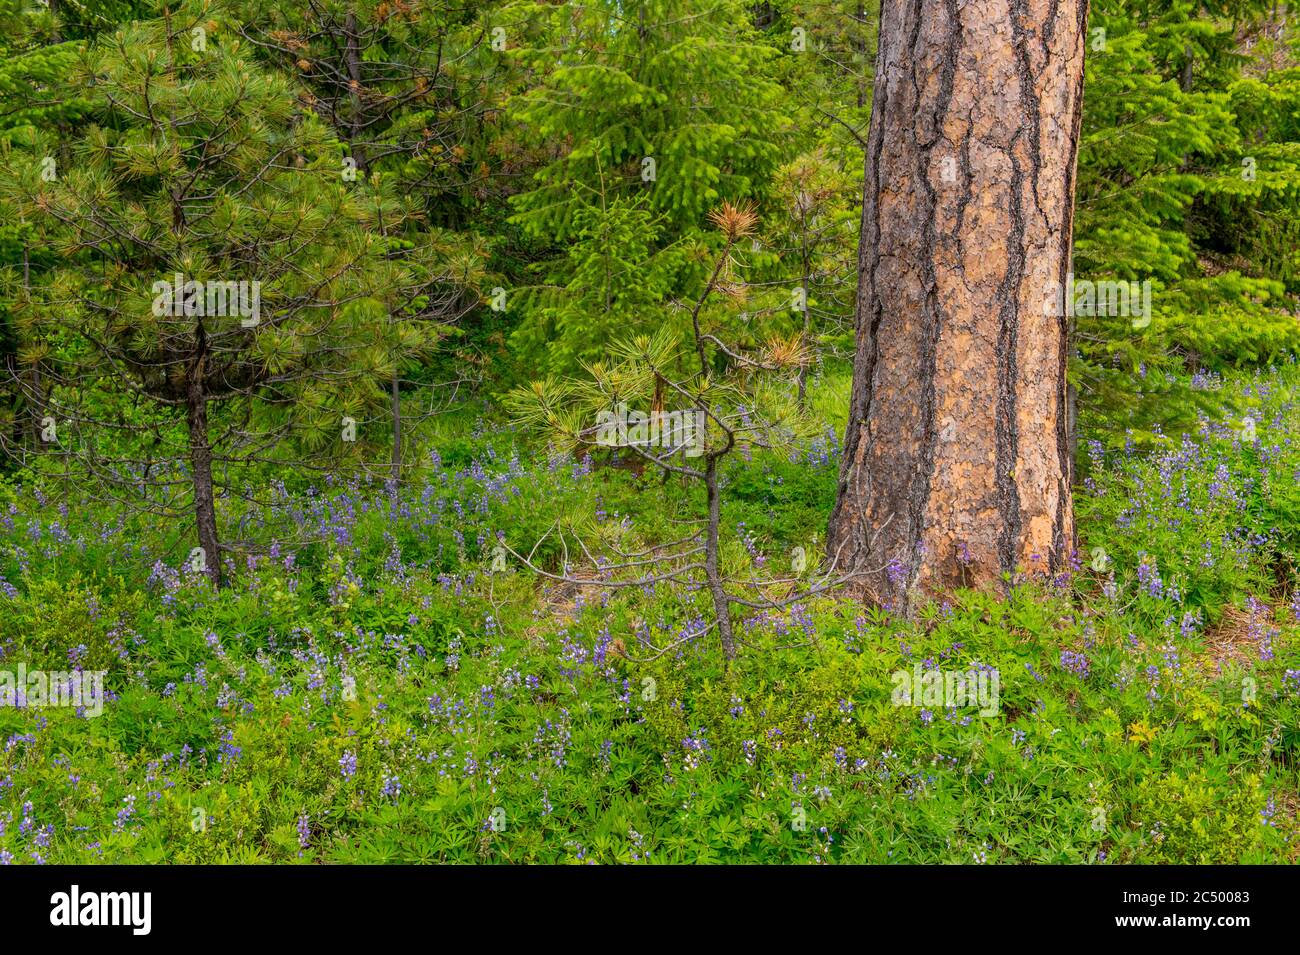 Lupine flowers covering the ground around a Ponderosa pine tree in the forest along the Icicle Gorge Trail near Leavenworth, Eastern Washington State, Stock Photo